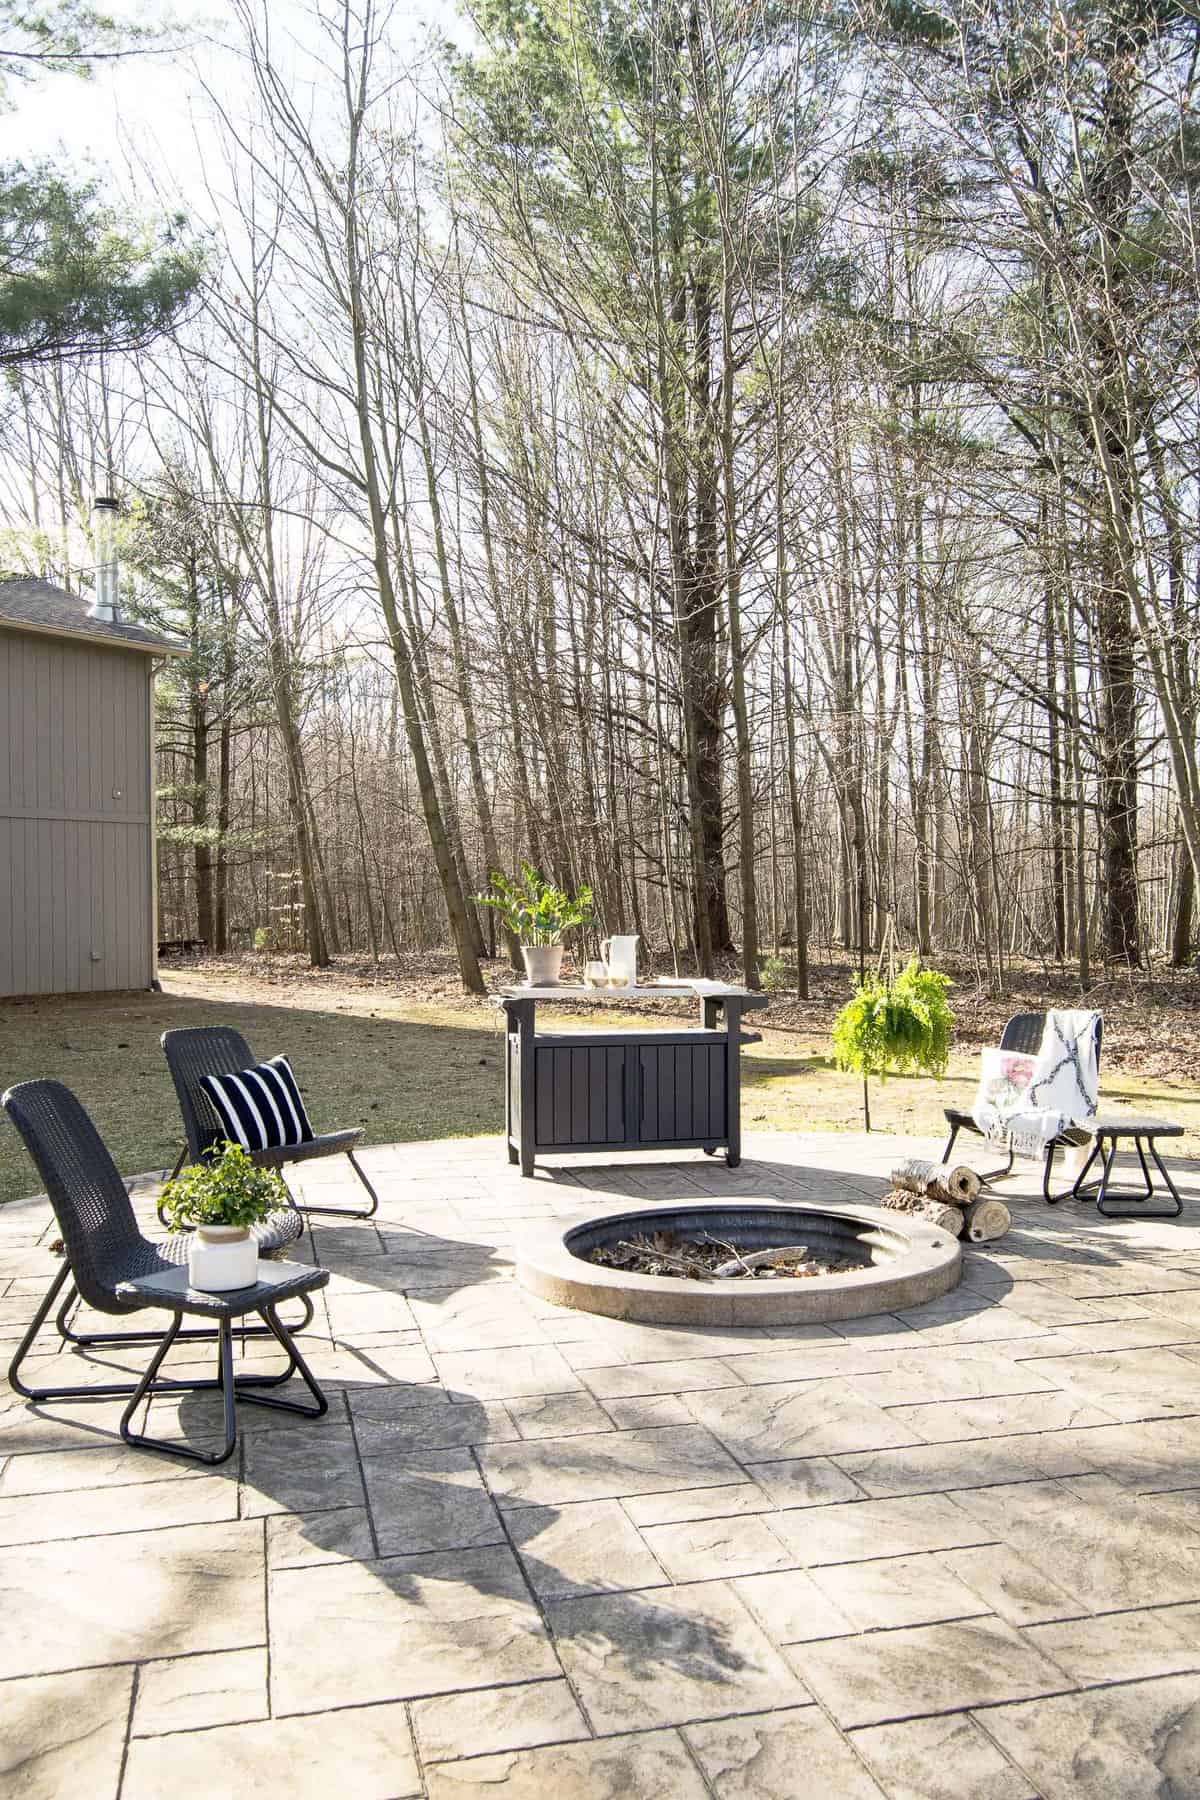 Are you excited for outdoor entertaining? Today I'm sharing my stamped concrete fire pit design plan as I gear up for the warm weather season! #fromhousetohaven #stampedconcrete #patiodesign #firepit